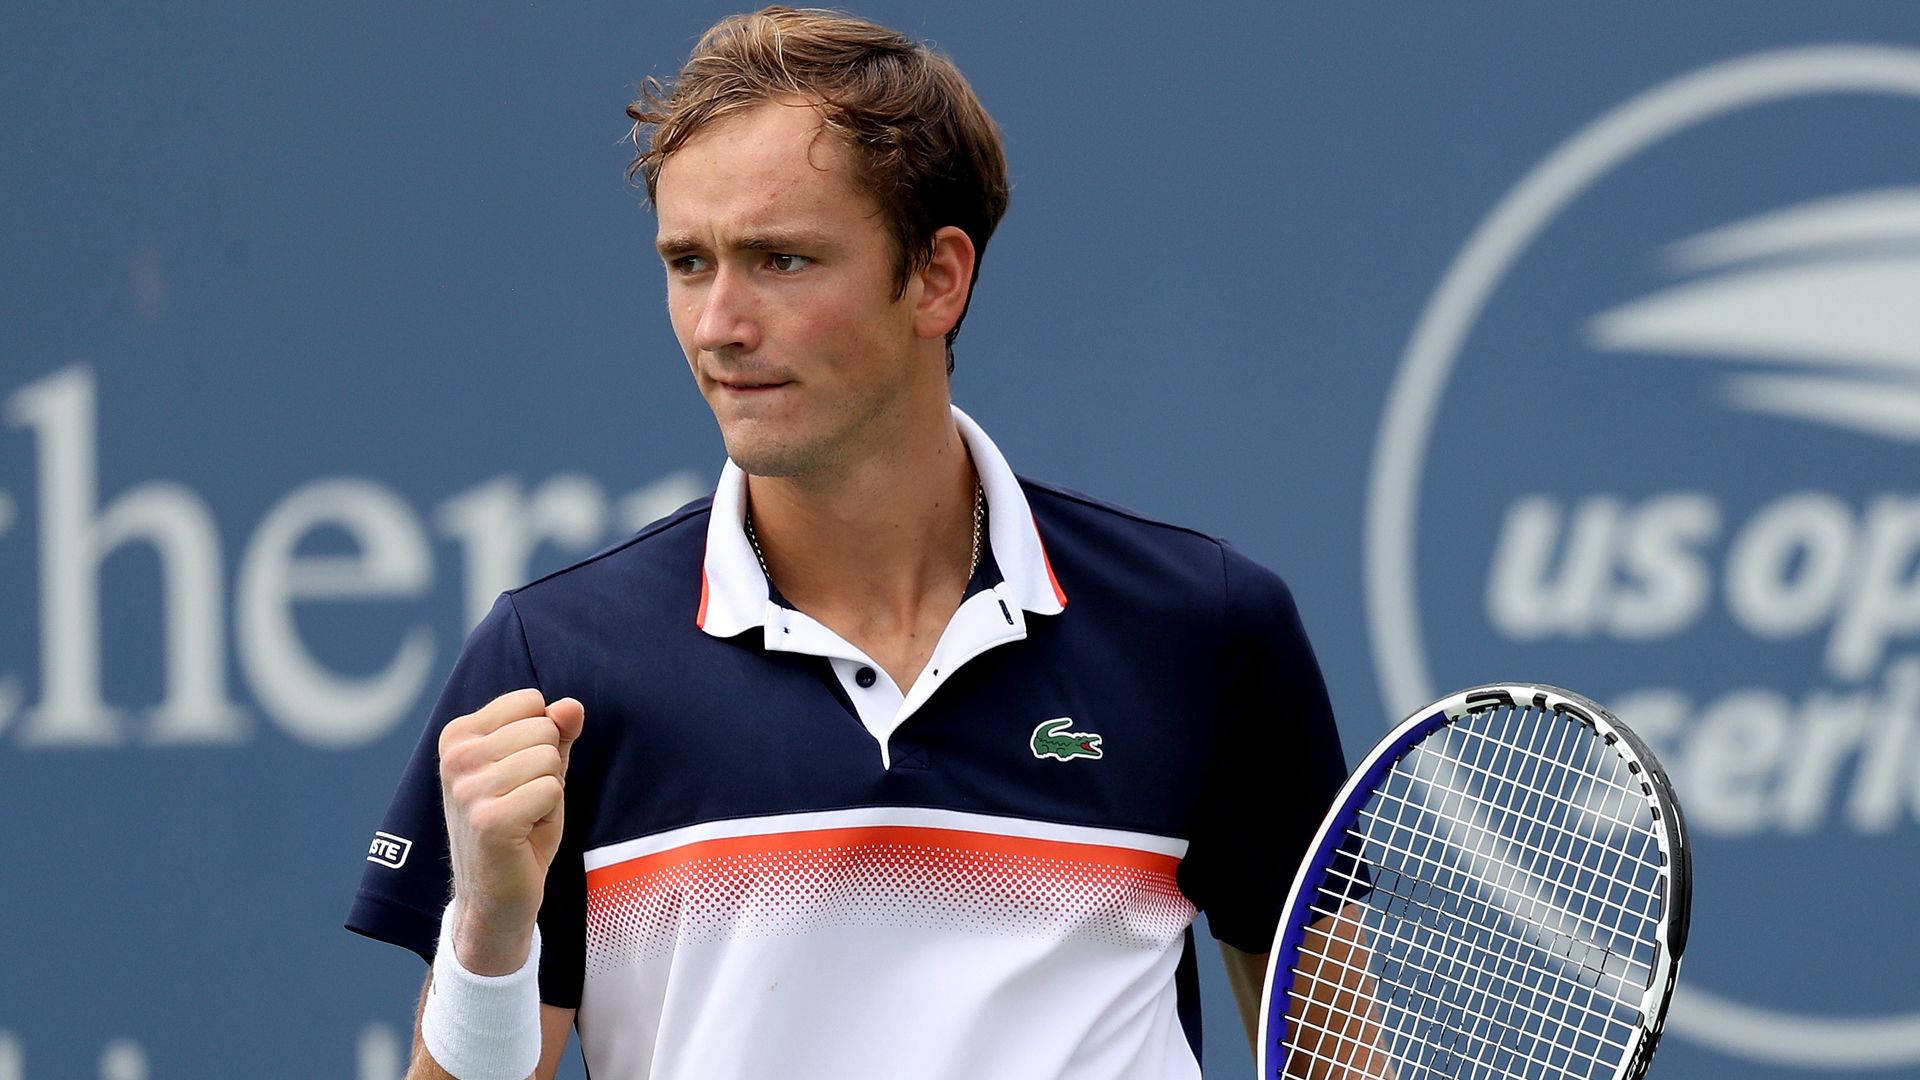 Daniil Medvedev Triumphantly Clenching Fist After A Win